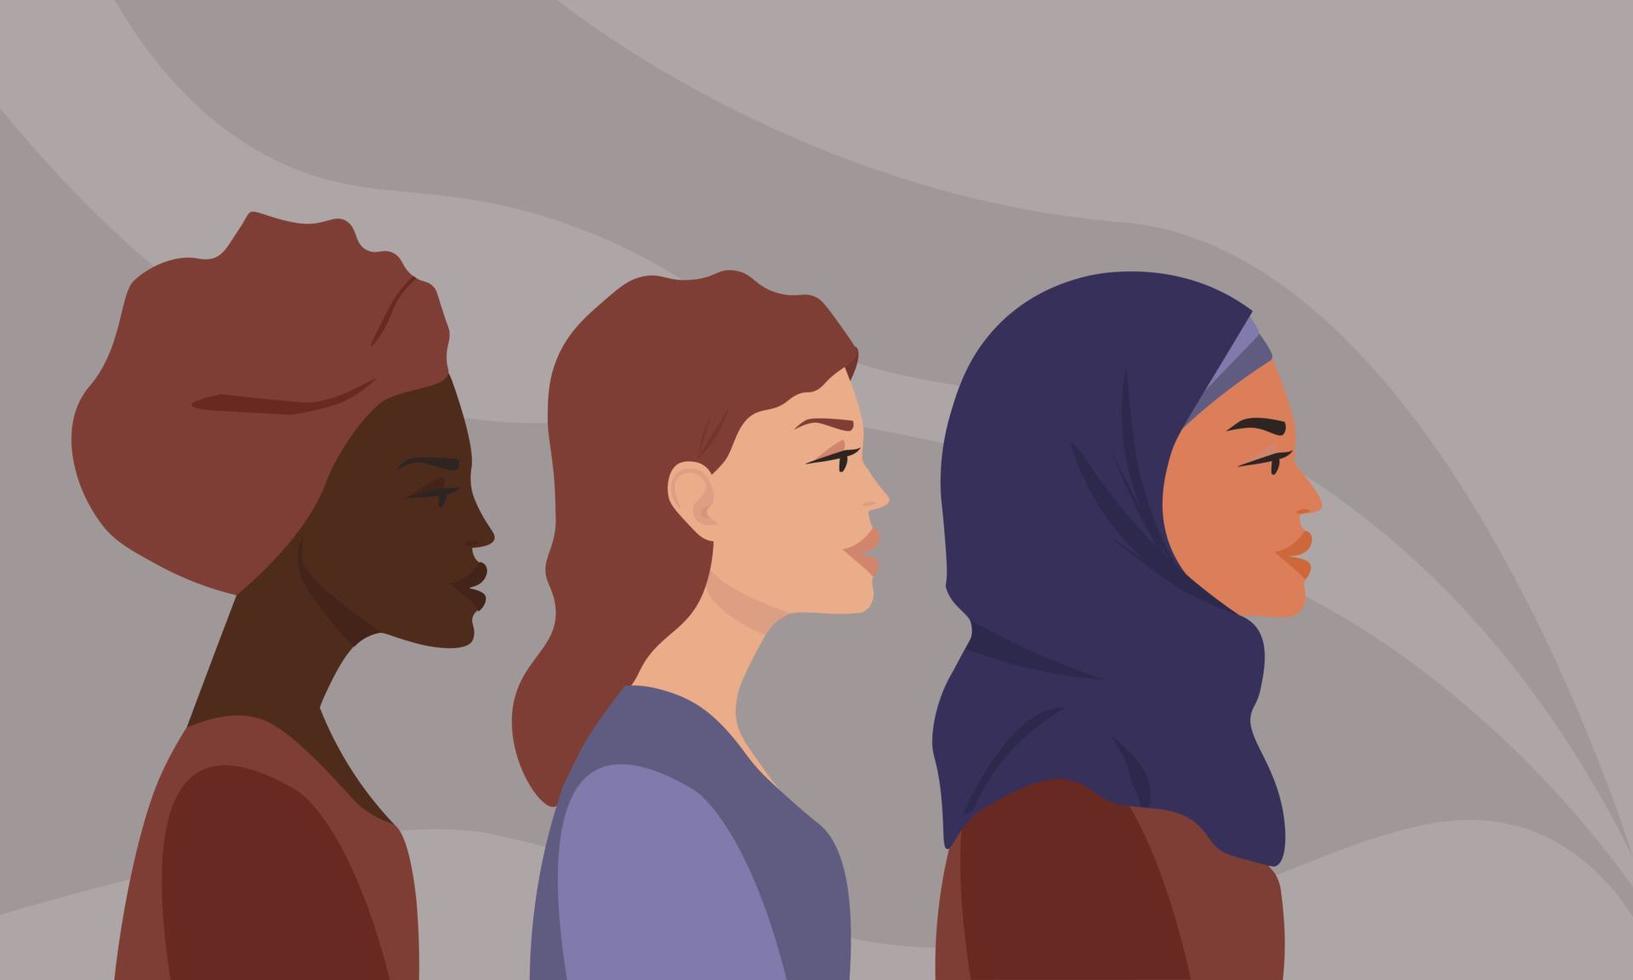 Women of different nationalities, religions, skin color in profile. The concept of equality, rights, freedom, feminism. Vector graphics.